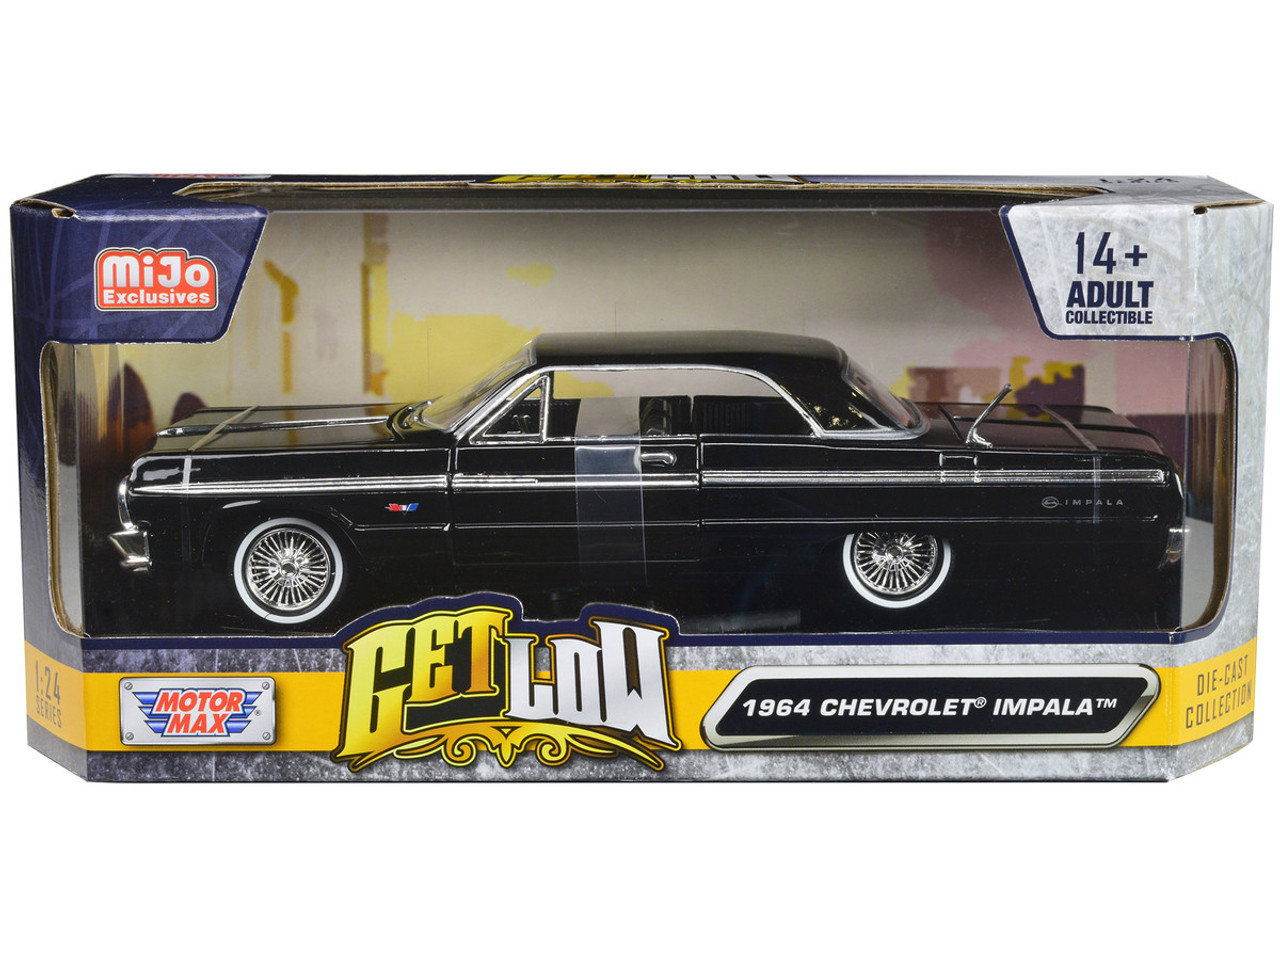 1964 Chevrolet Impala Lowrider Hard Top Black with Silver Top "Get Low" Series 1/24 Diecast Model Car by Motormax